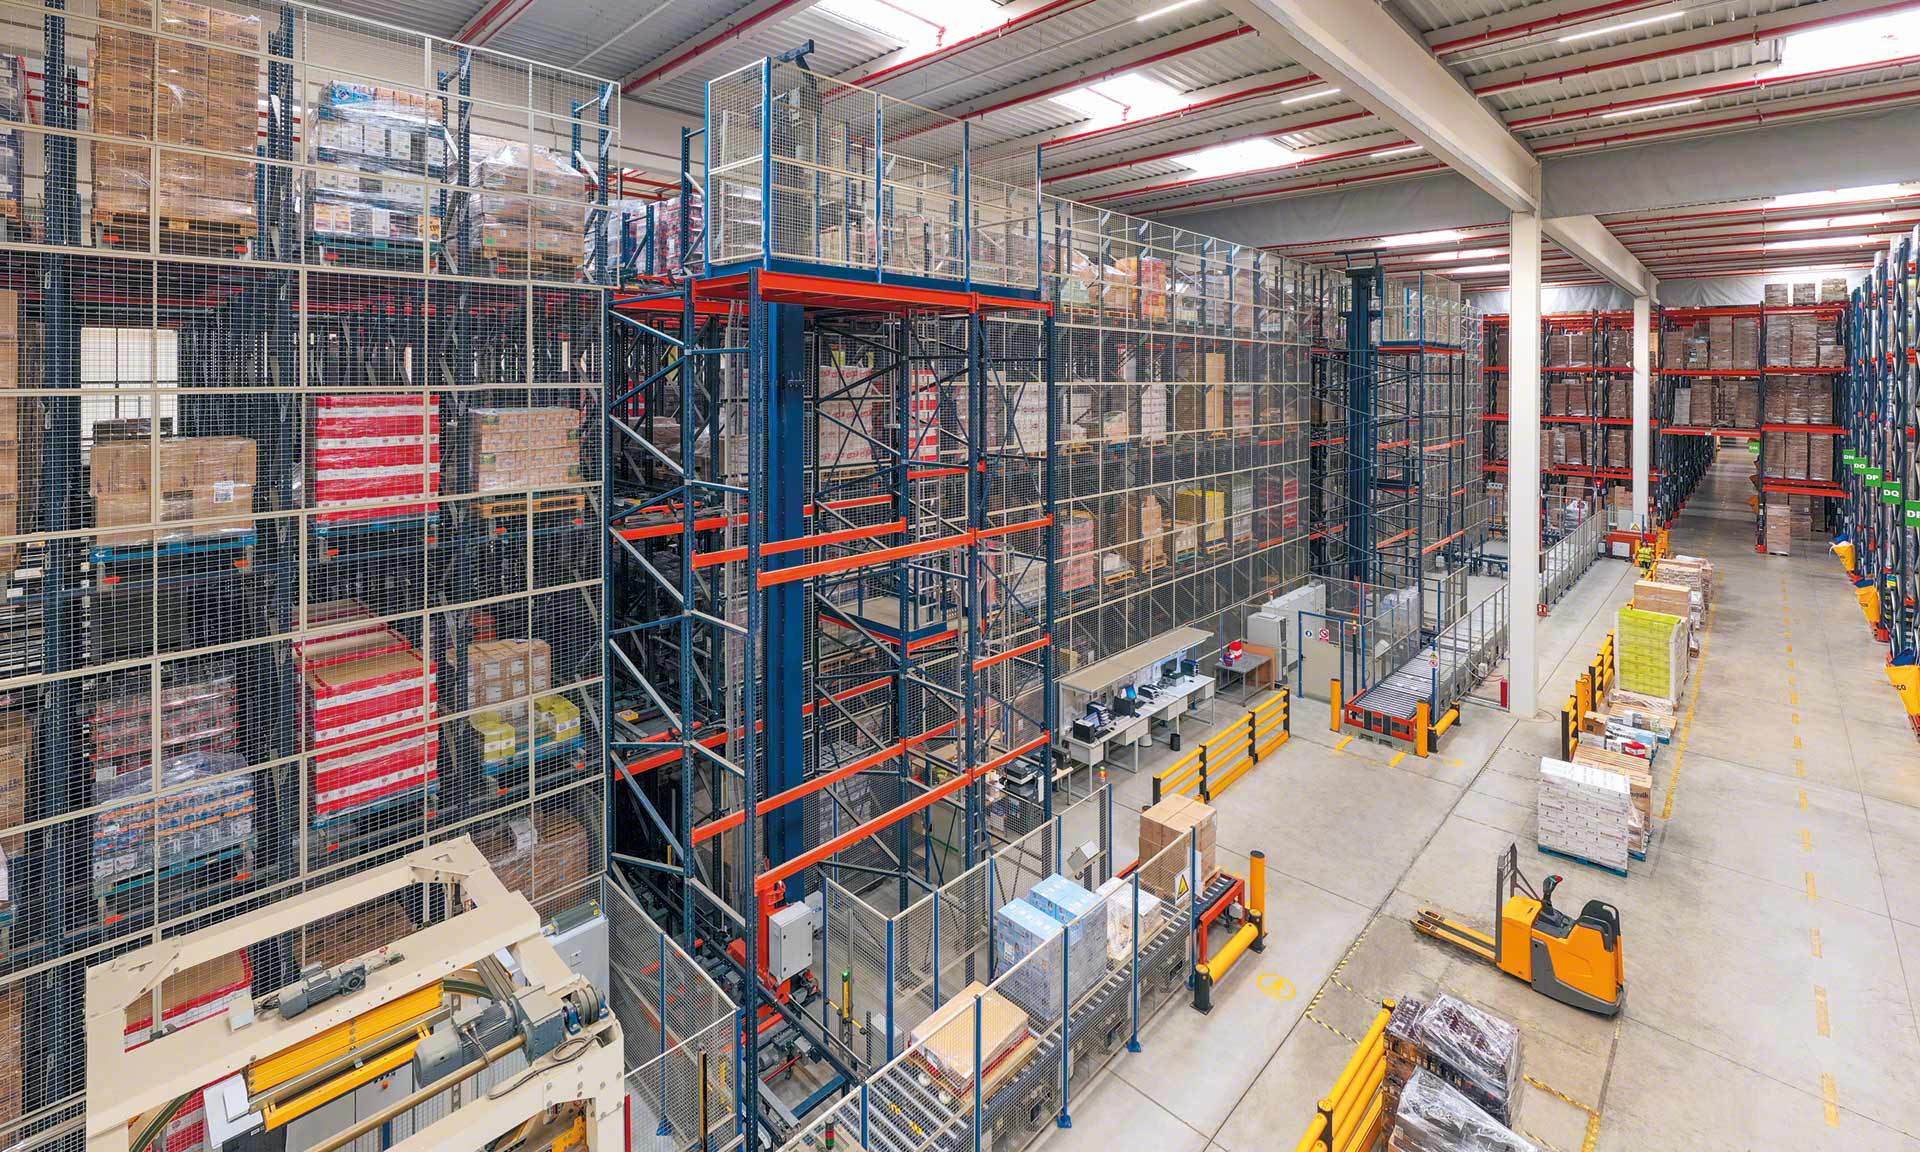 Warehouse equipment consists of any system or machine that facilitates operators' tasks in a warehouse